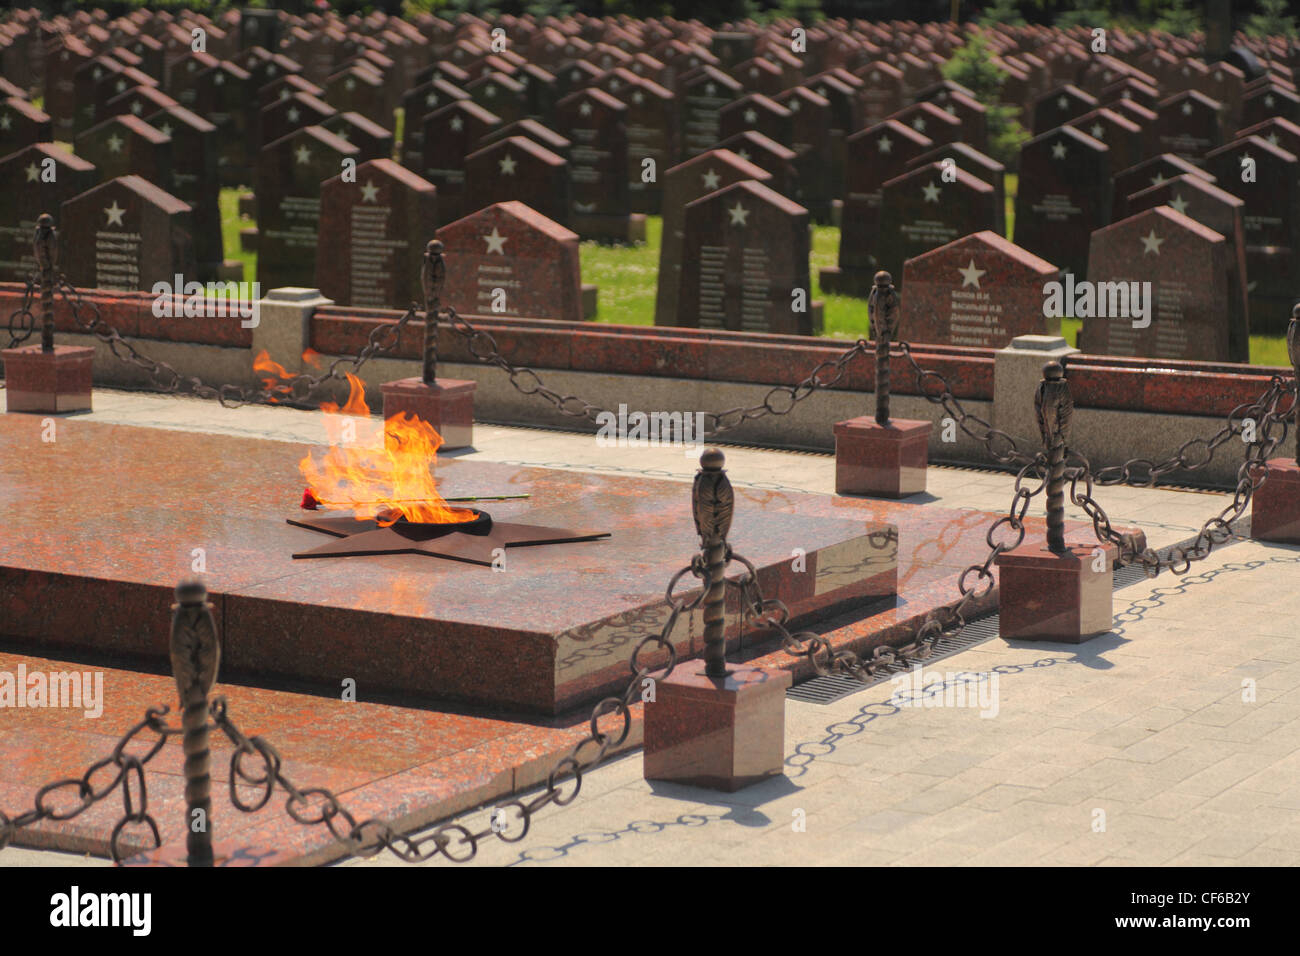 MOSCOW JUNE 23 Eternal flame at Military Memorial Preobrazhenskoye cemetery June 23 2010 Moscow Russia biggest Moscow military Stock Photo